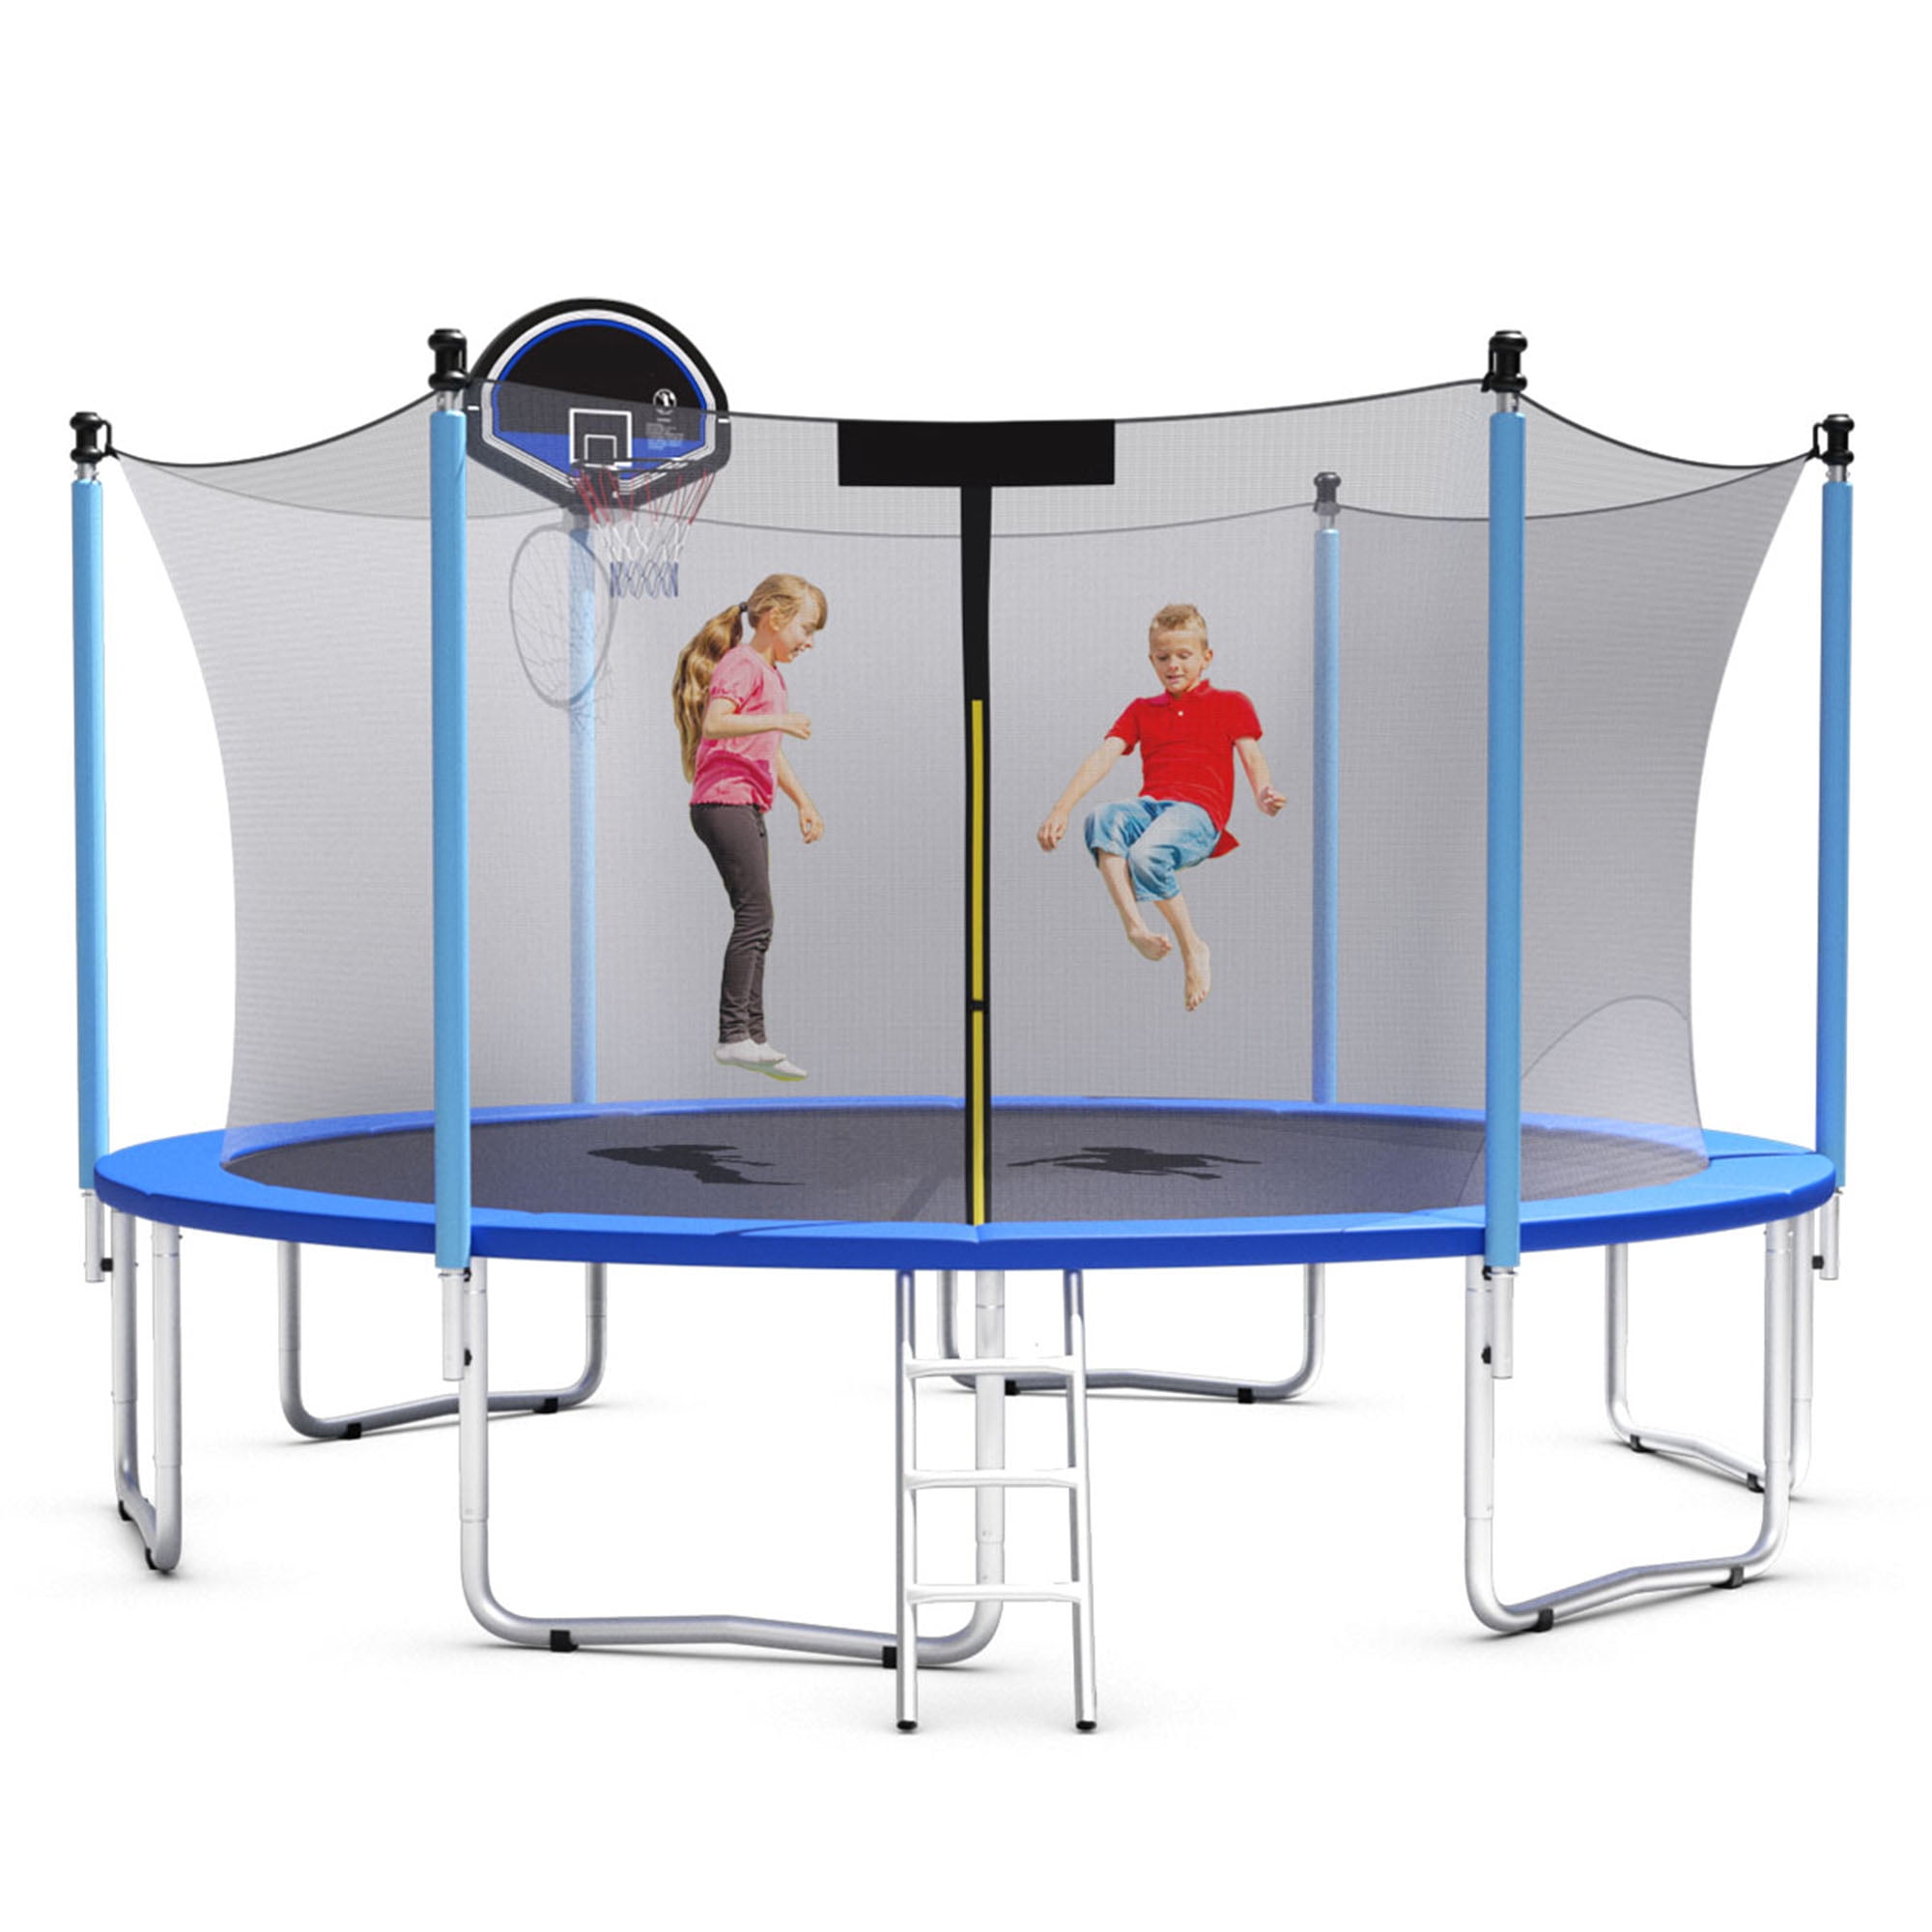 Gymax 14ft Trampoline Combo Bounding Bed Trampoline w/ Enclosure Net Ladder